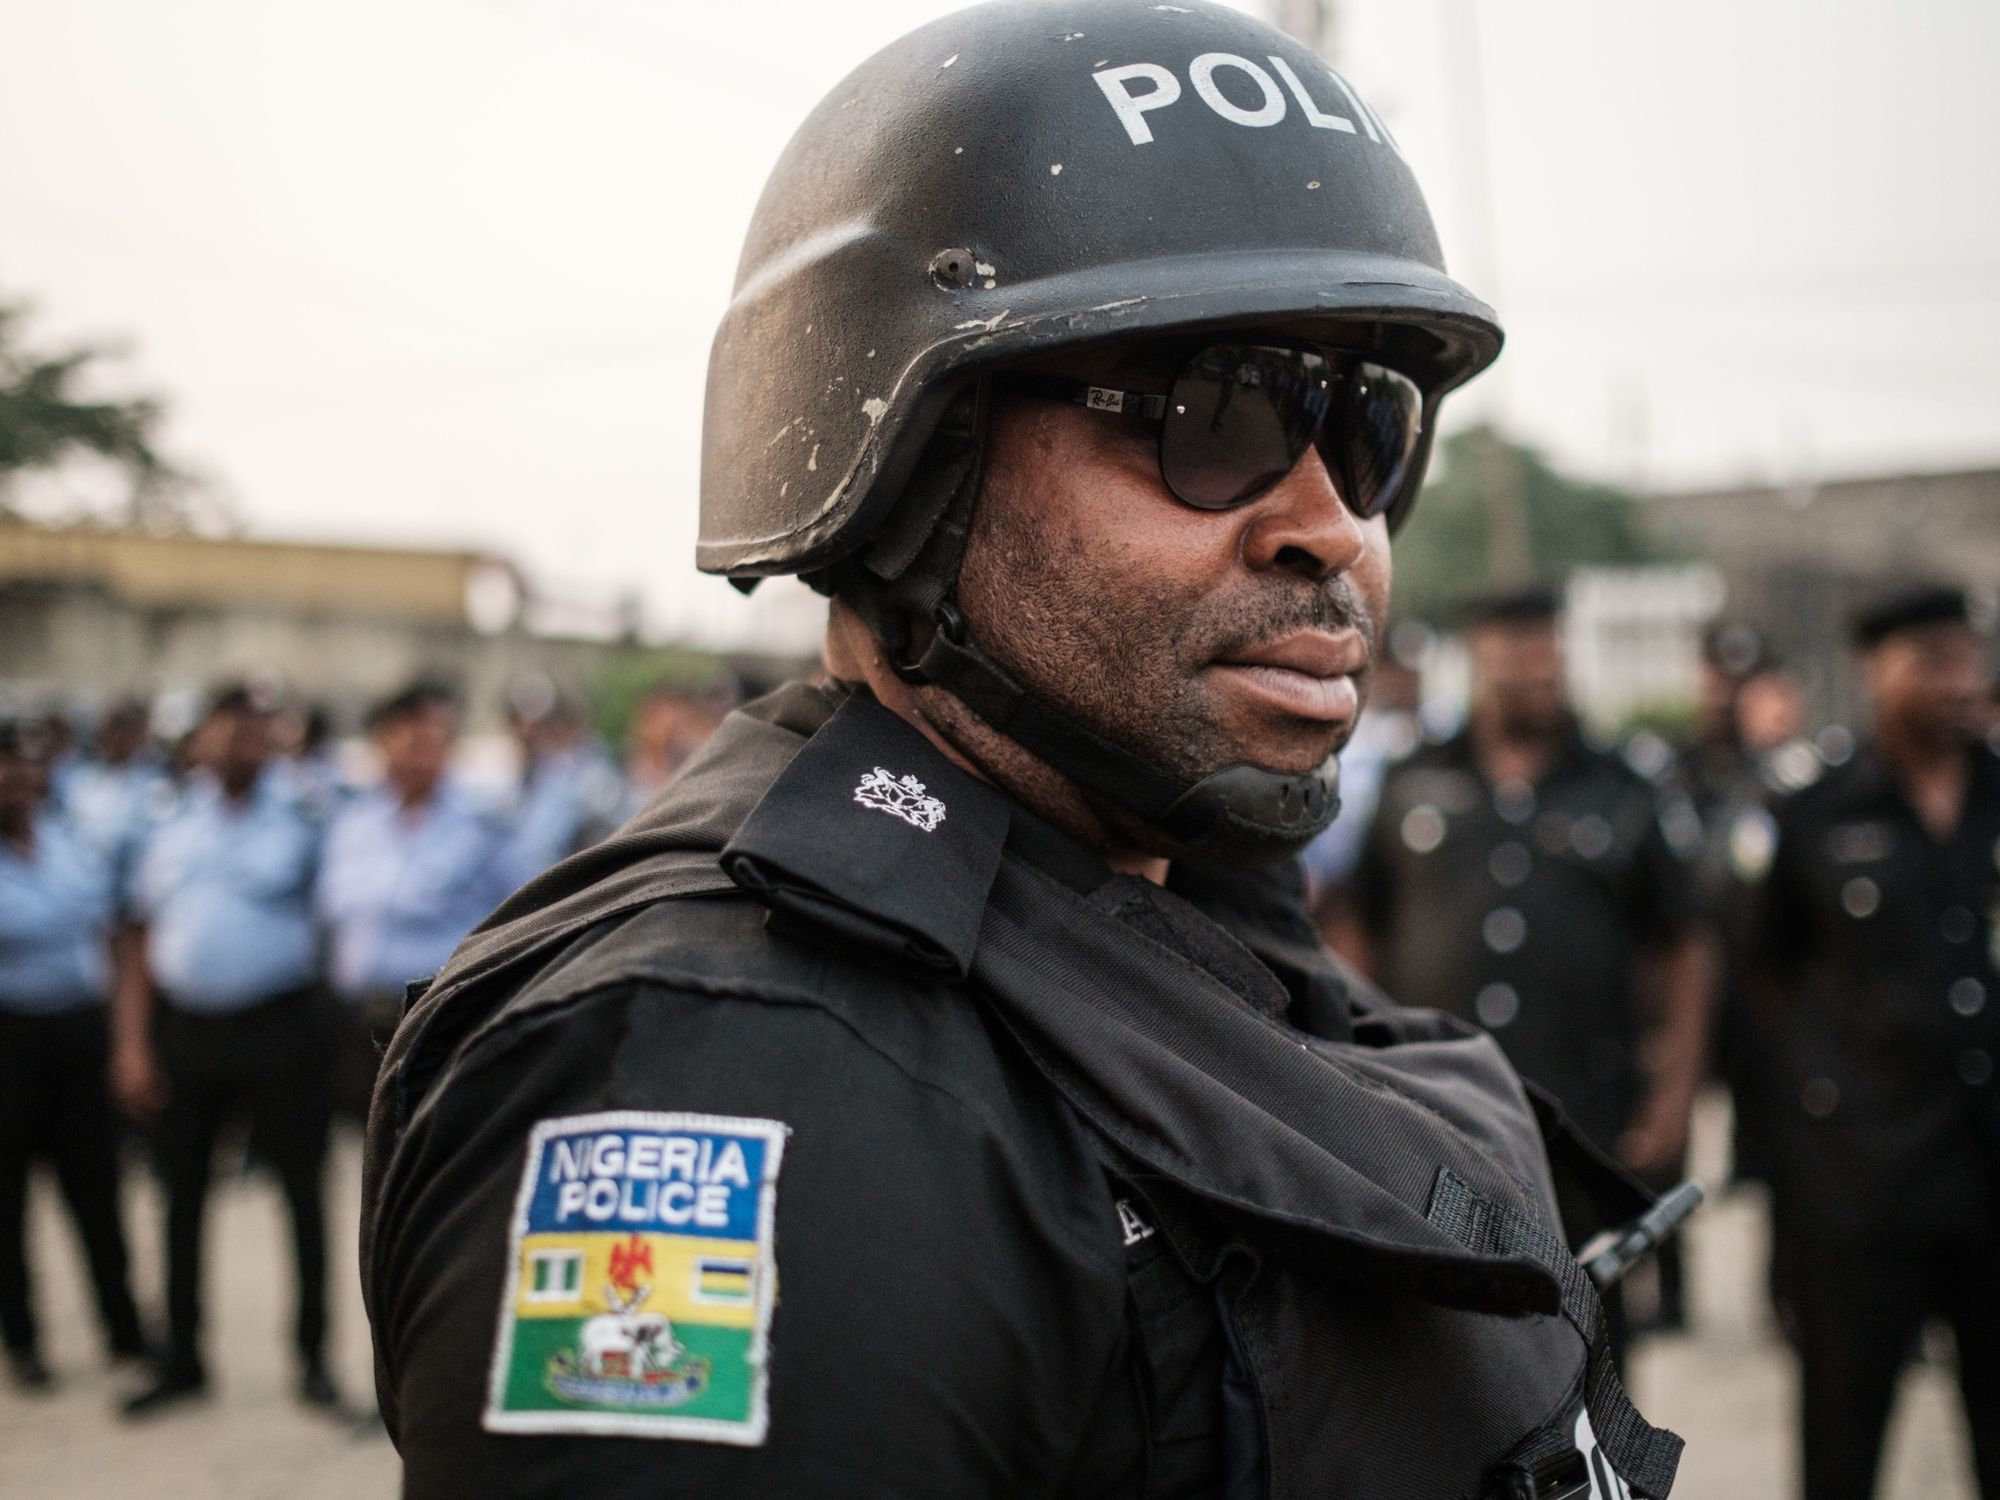 #StopRobbingUs: Nigerian Techies Are Getting Arrested on Their Way to Work and They’re Pissed